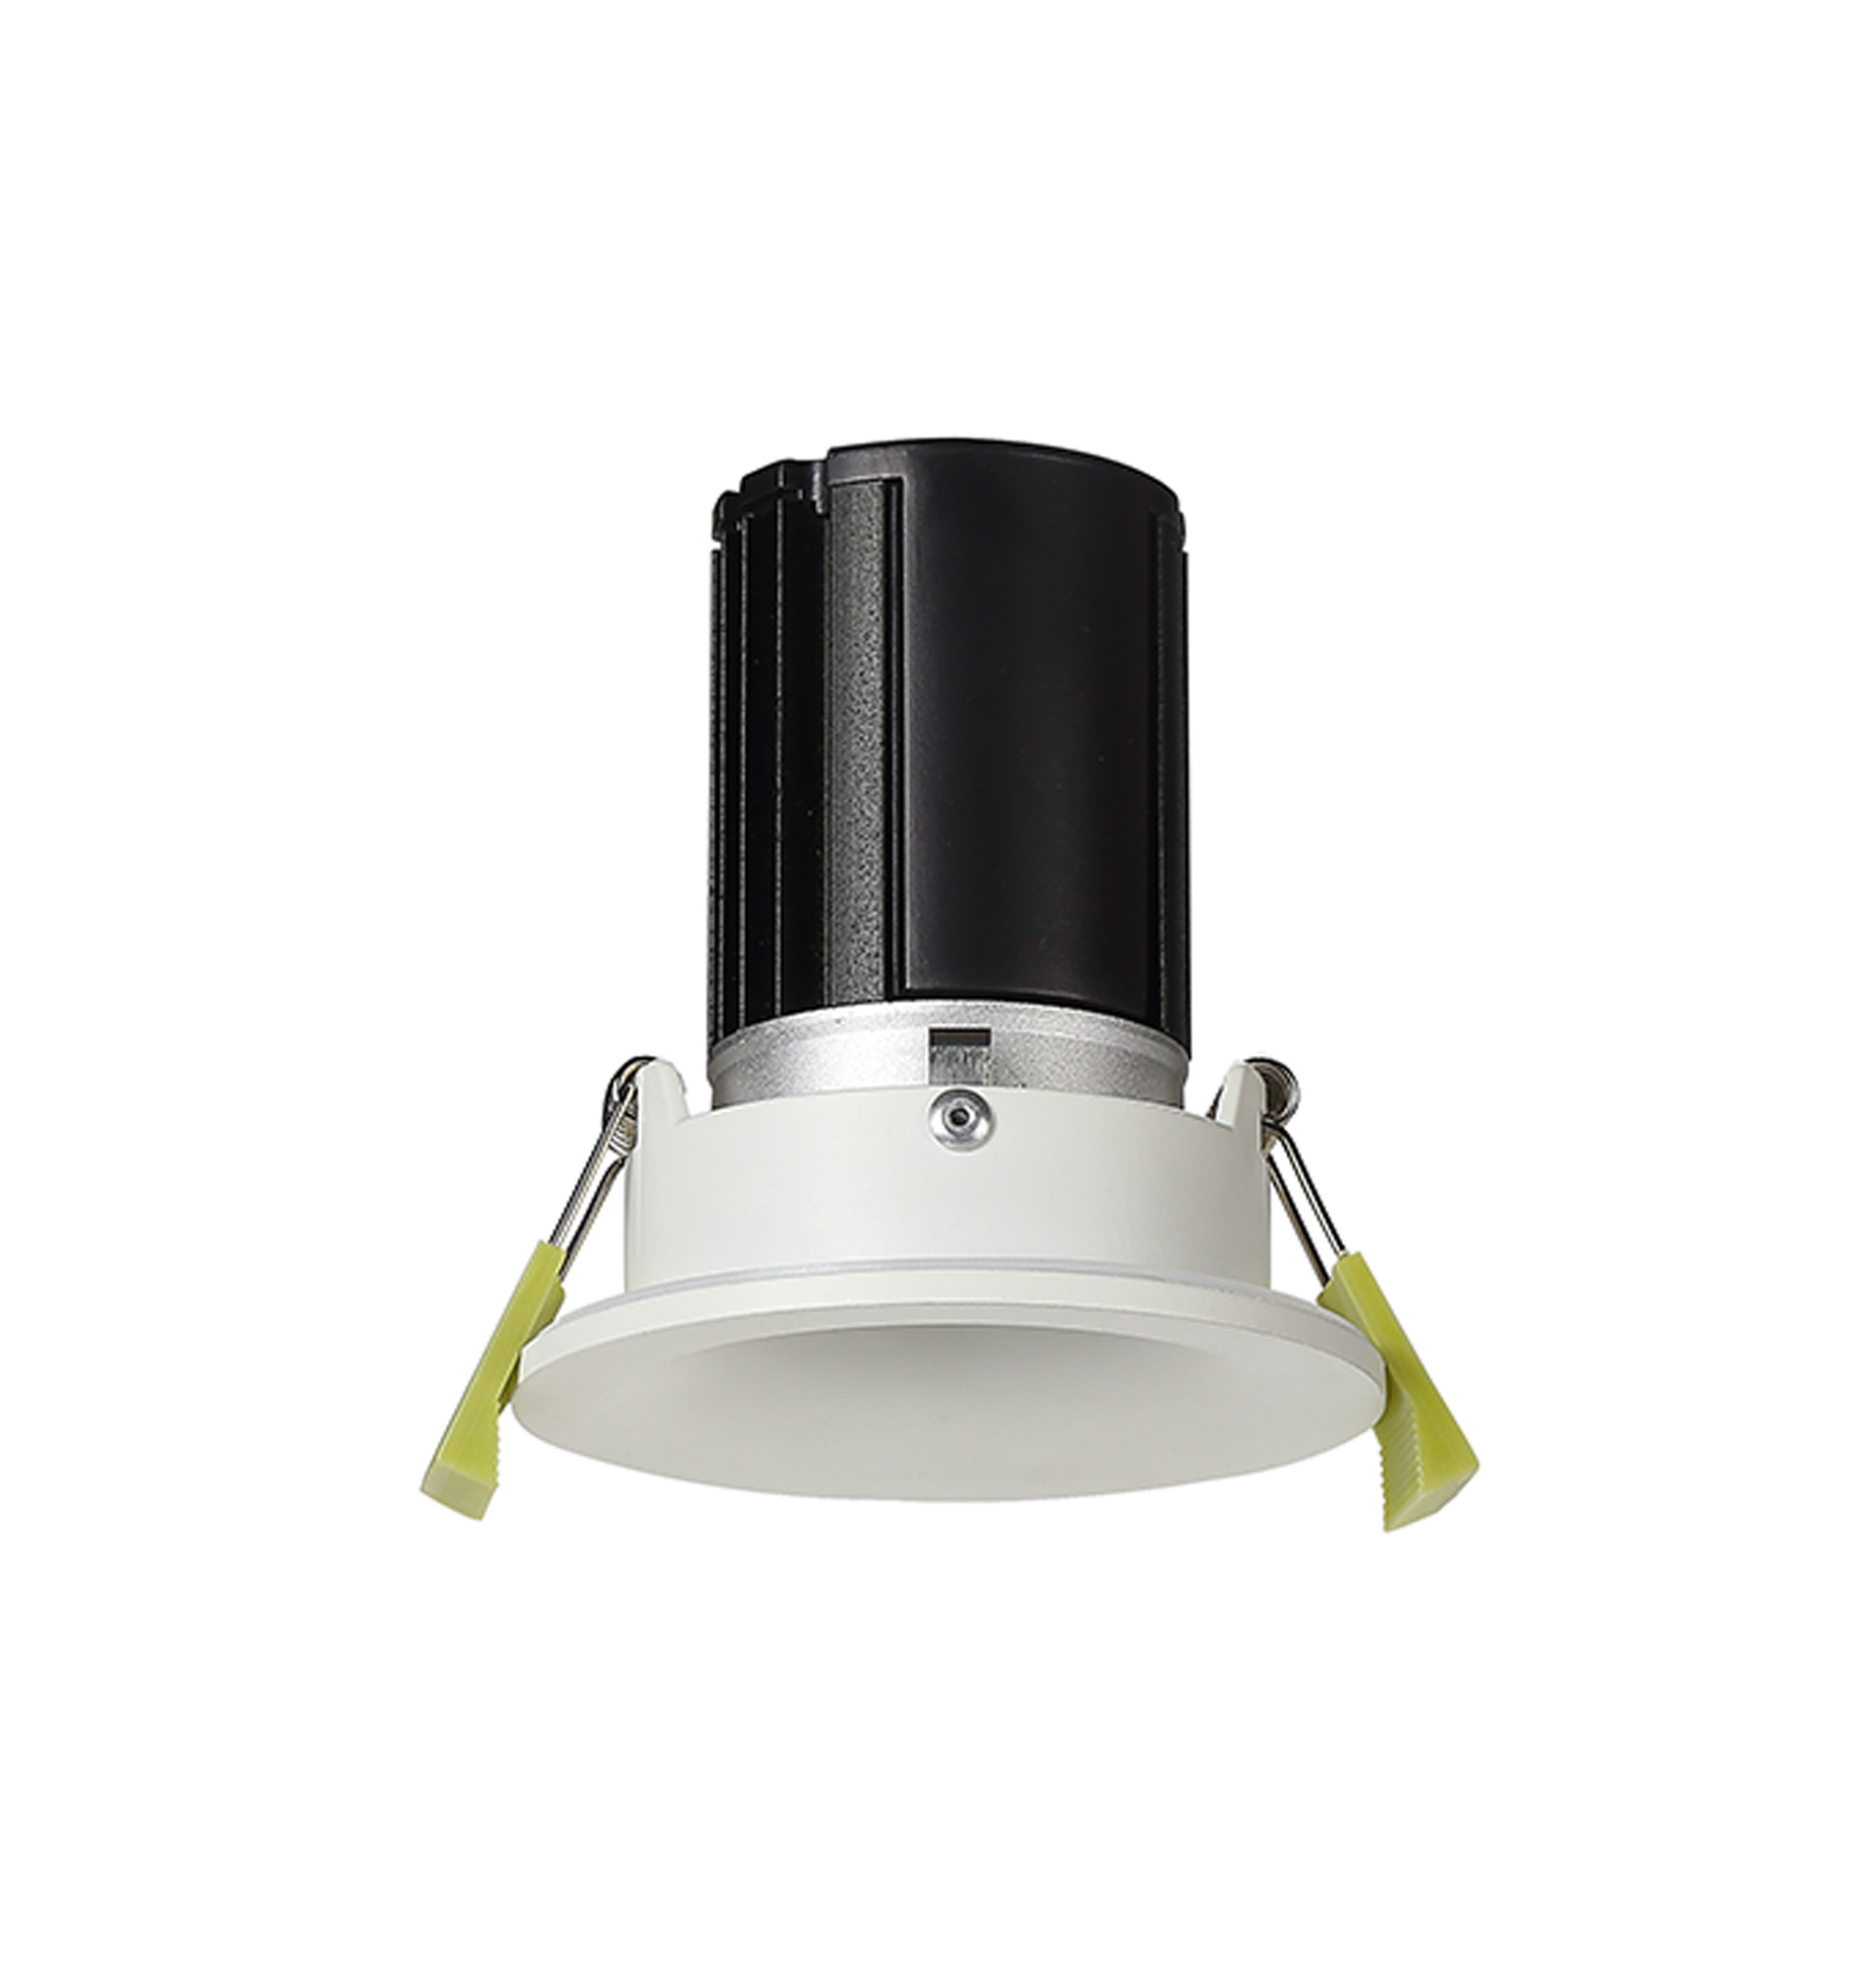 DM201456  Bruve 9 Tridonic powered 9W 2700K 700lm 24° LED Engine;250mA ; CRI>90 LED Engine Matt White Fixed Round Recessed Downlight; Inner Glass cover; IP65